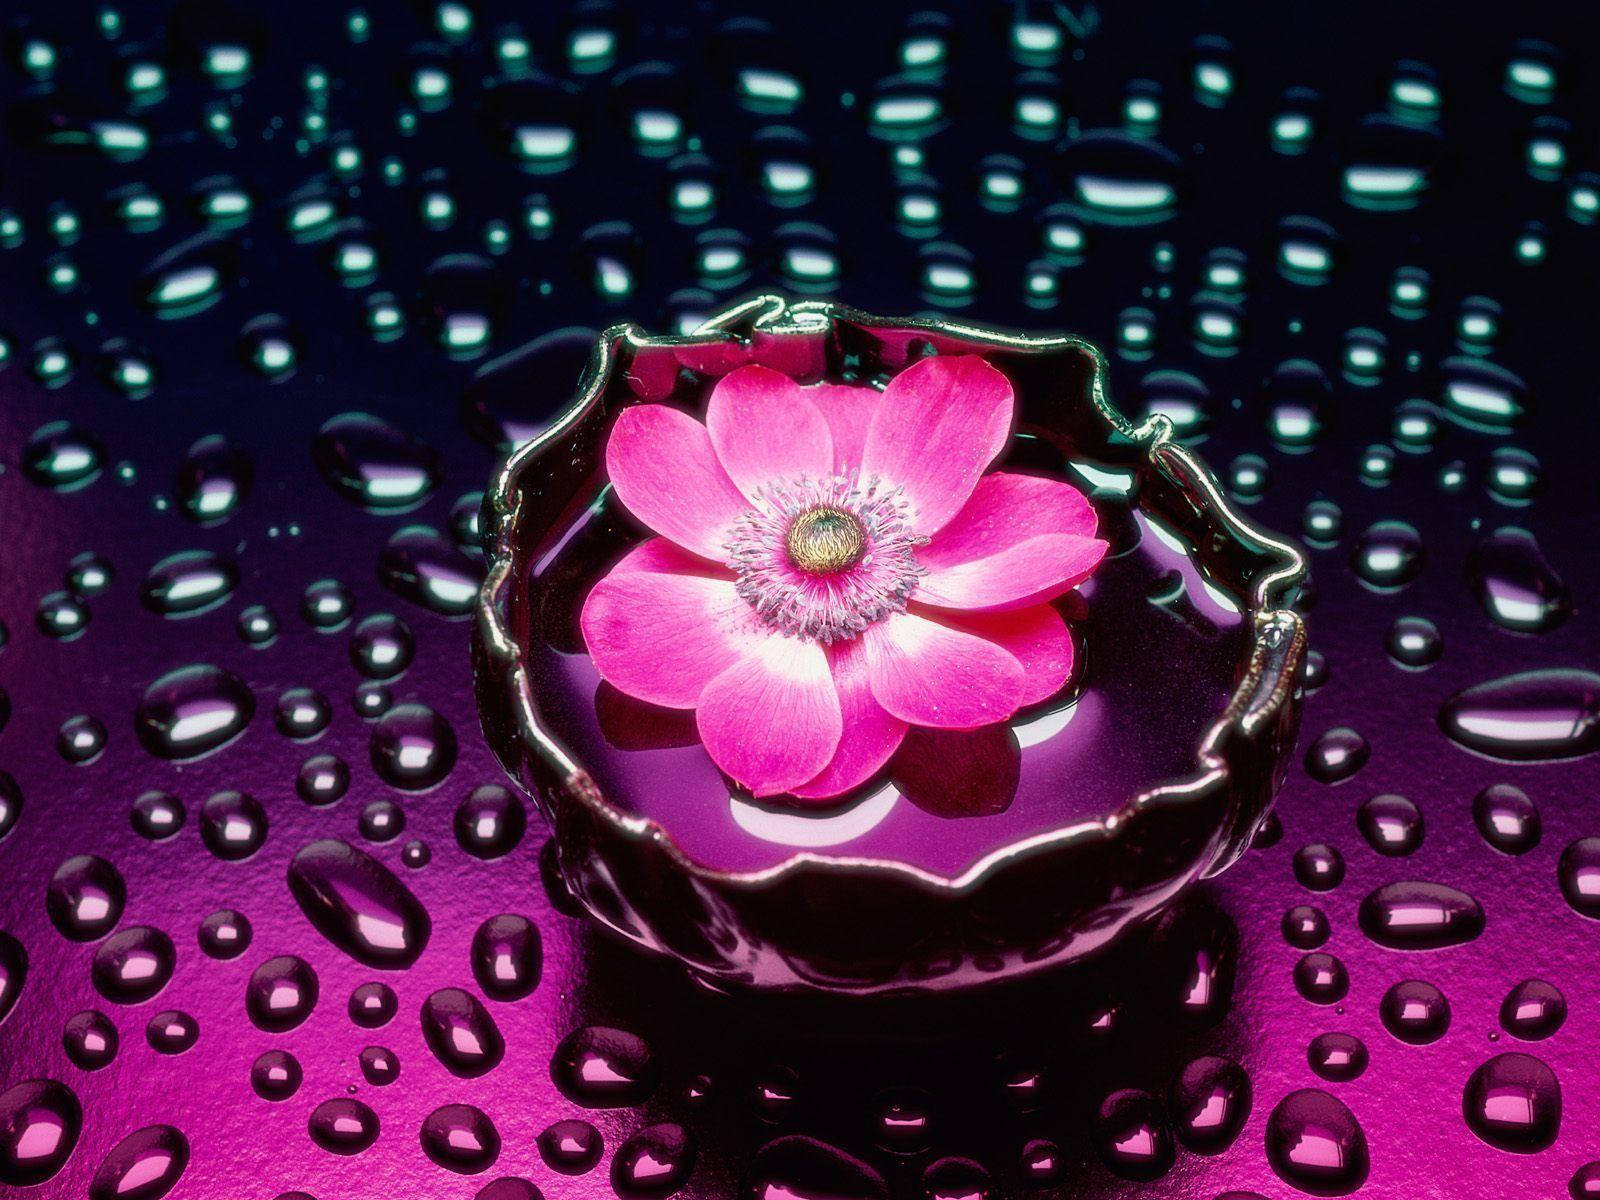 An enchanting pink flower making ripples in the water. Wallpaper